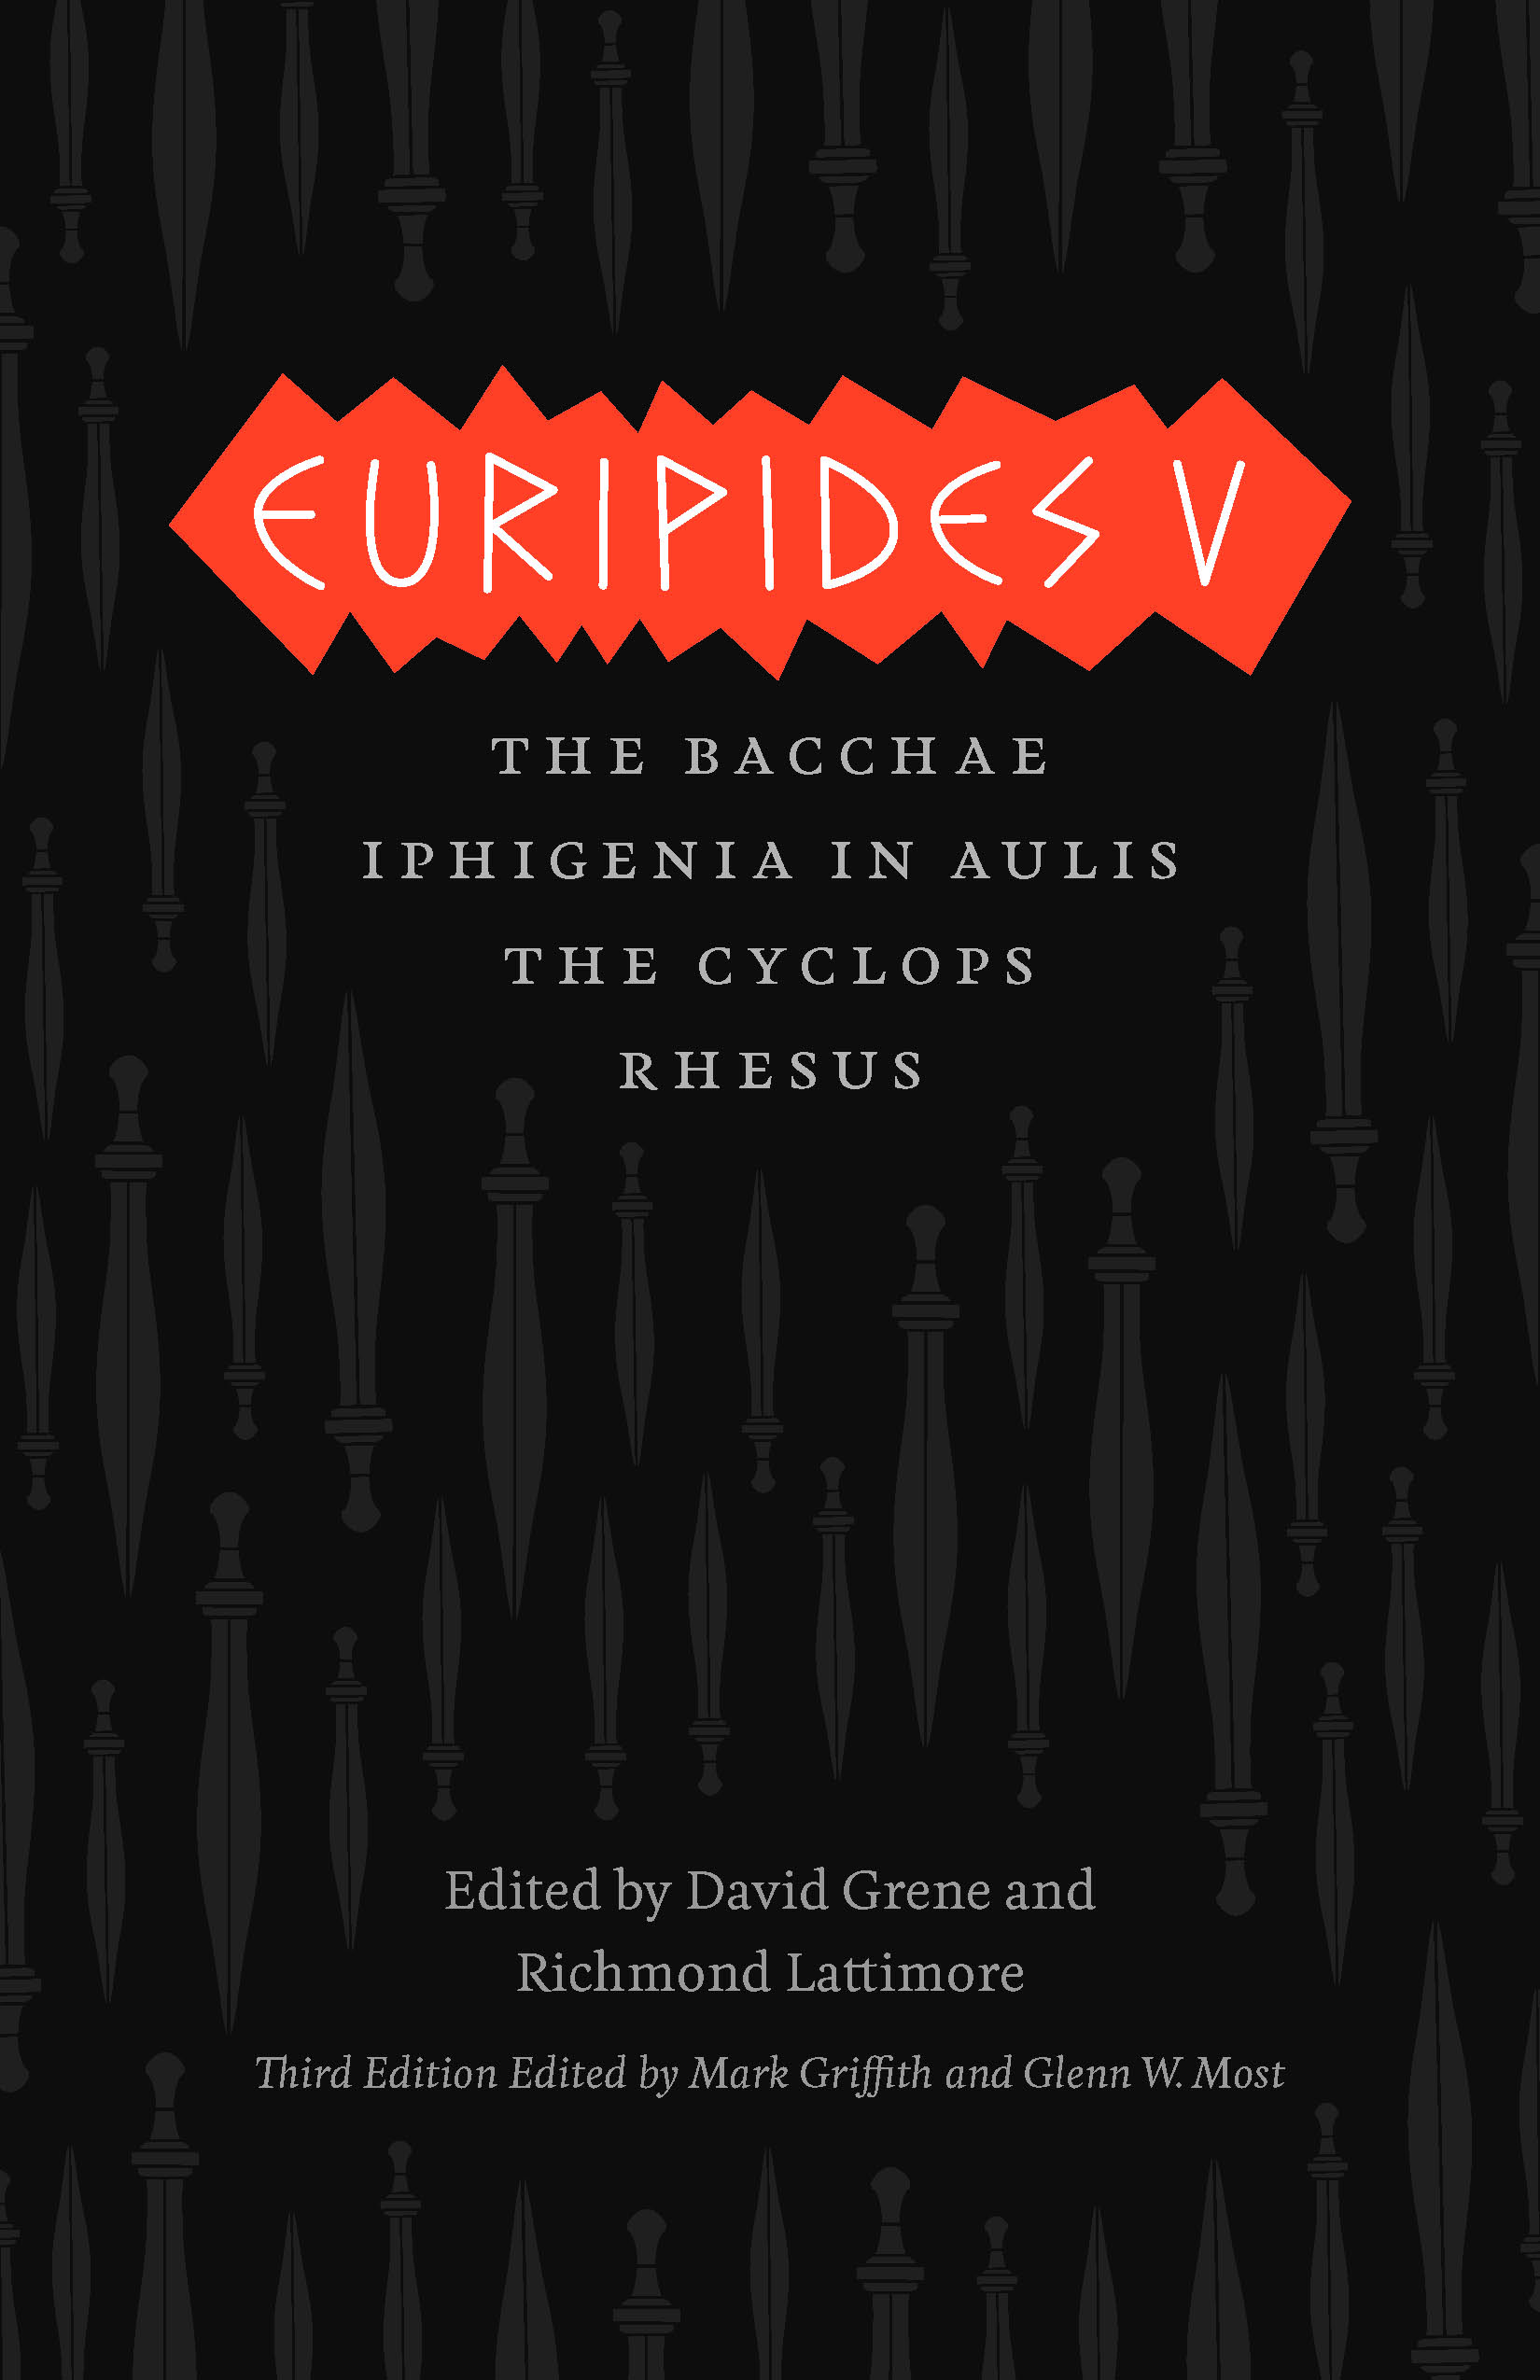 Euripides V: Bacchae, Iphigenia in Aulis, The Cyclops, Rhesus (The Complete Greek Tragedies) Euripides, Mark Griffith, Glenn W. Most and David Grene